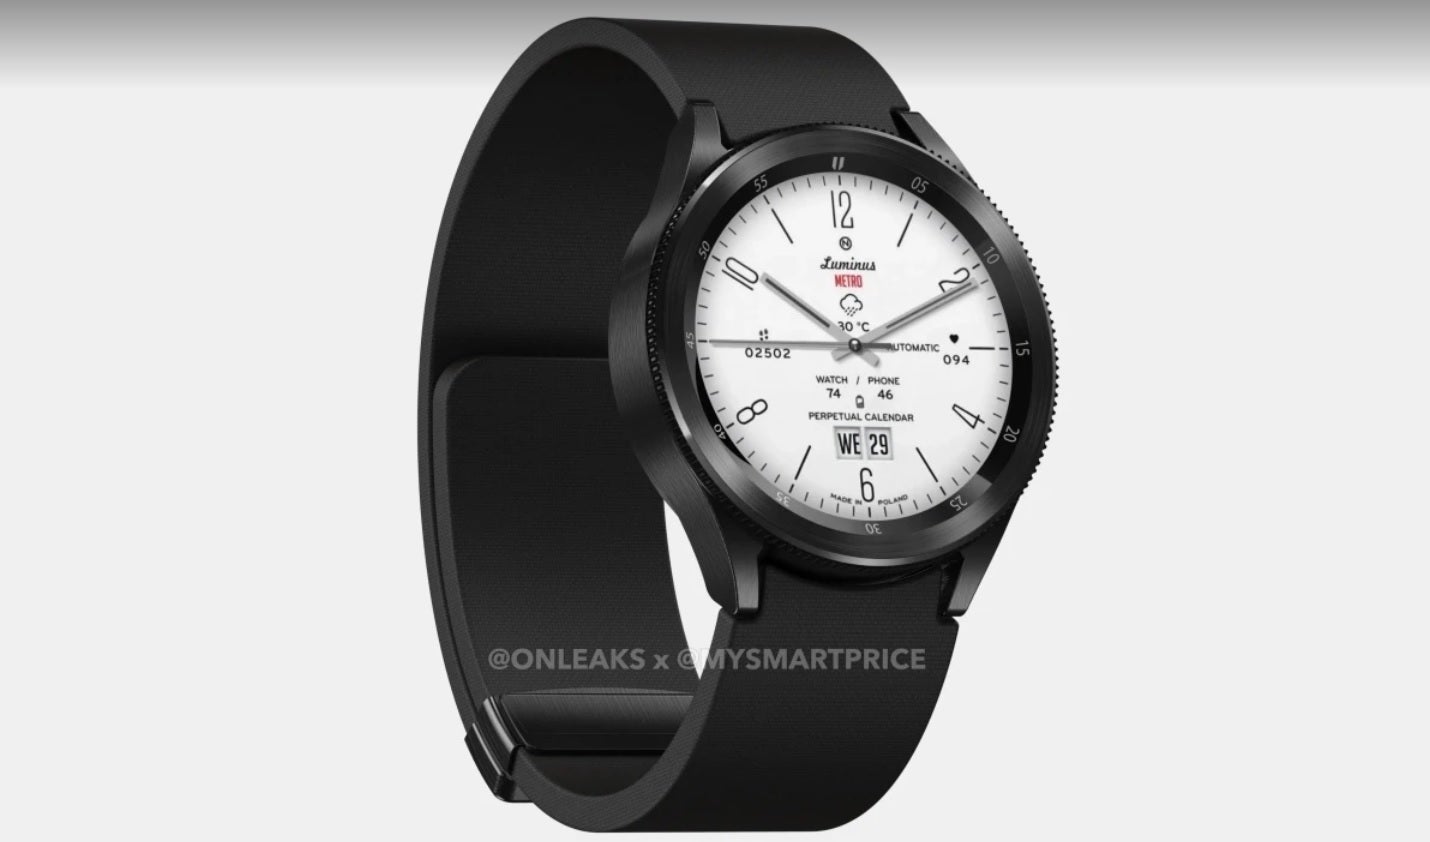 Render of the Samsung Galaxy Watch 6 - Samsung's next premium Galaxy Watch is now a step closer to its U.S. release